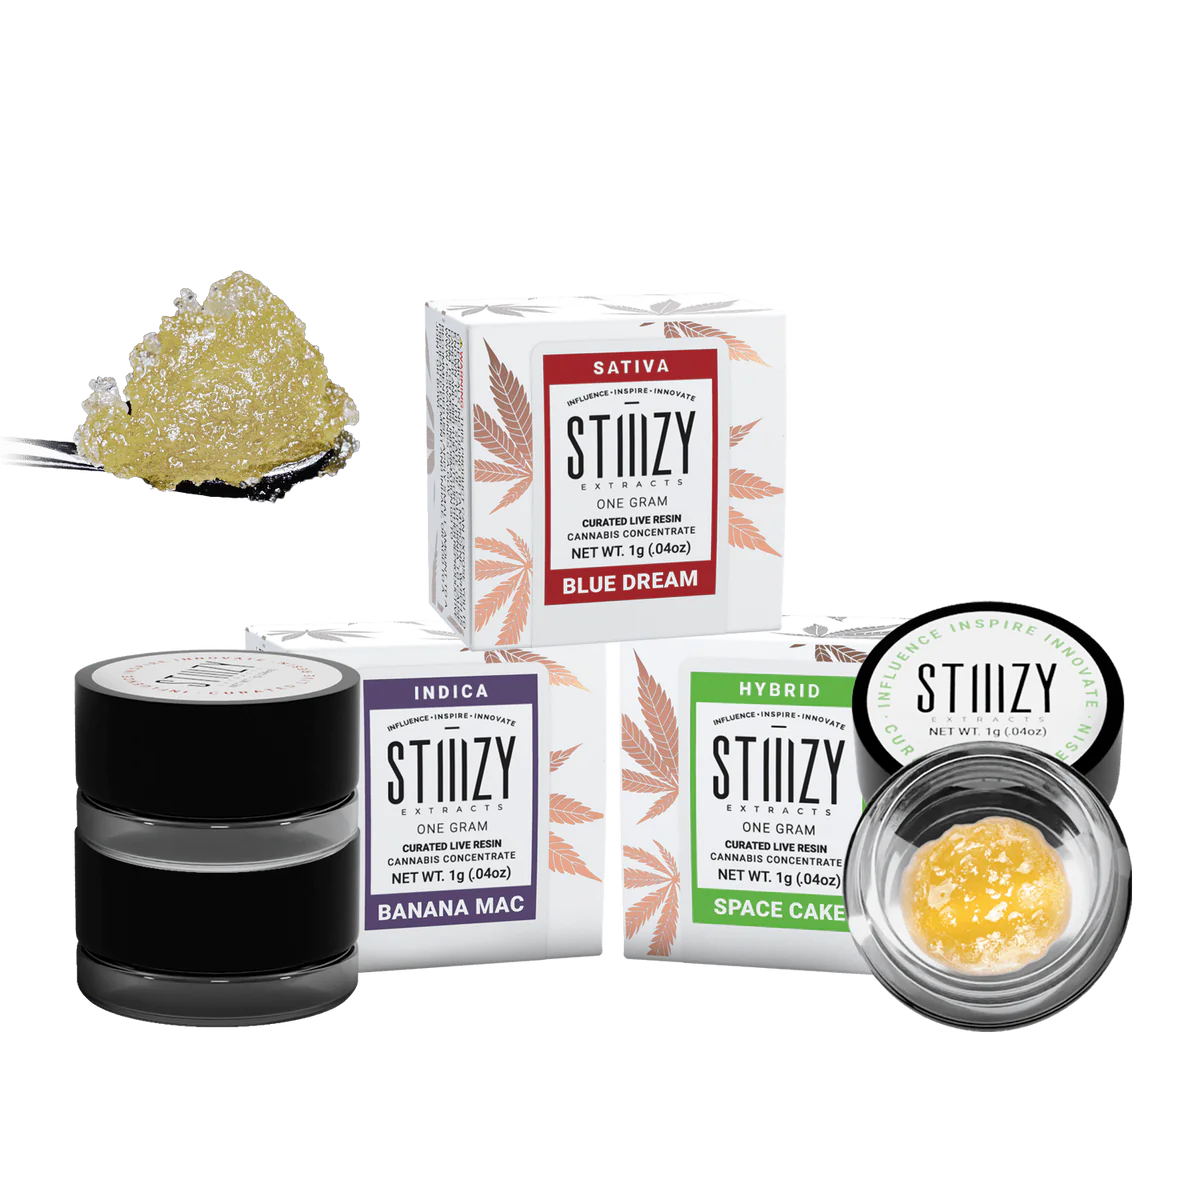 Stiiizy Curated Live Resin